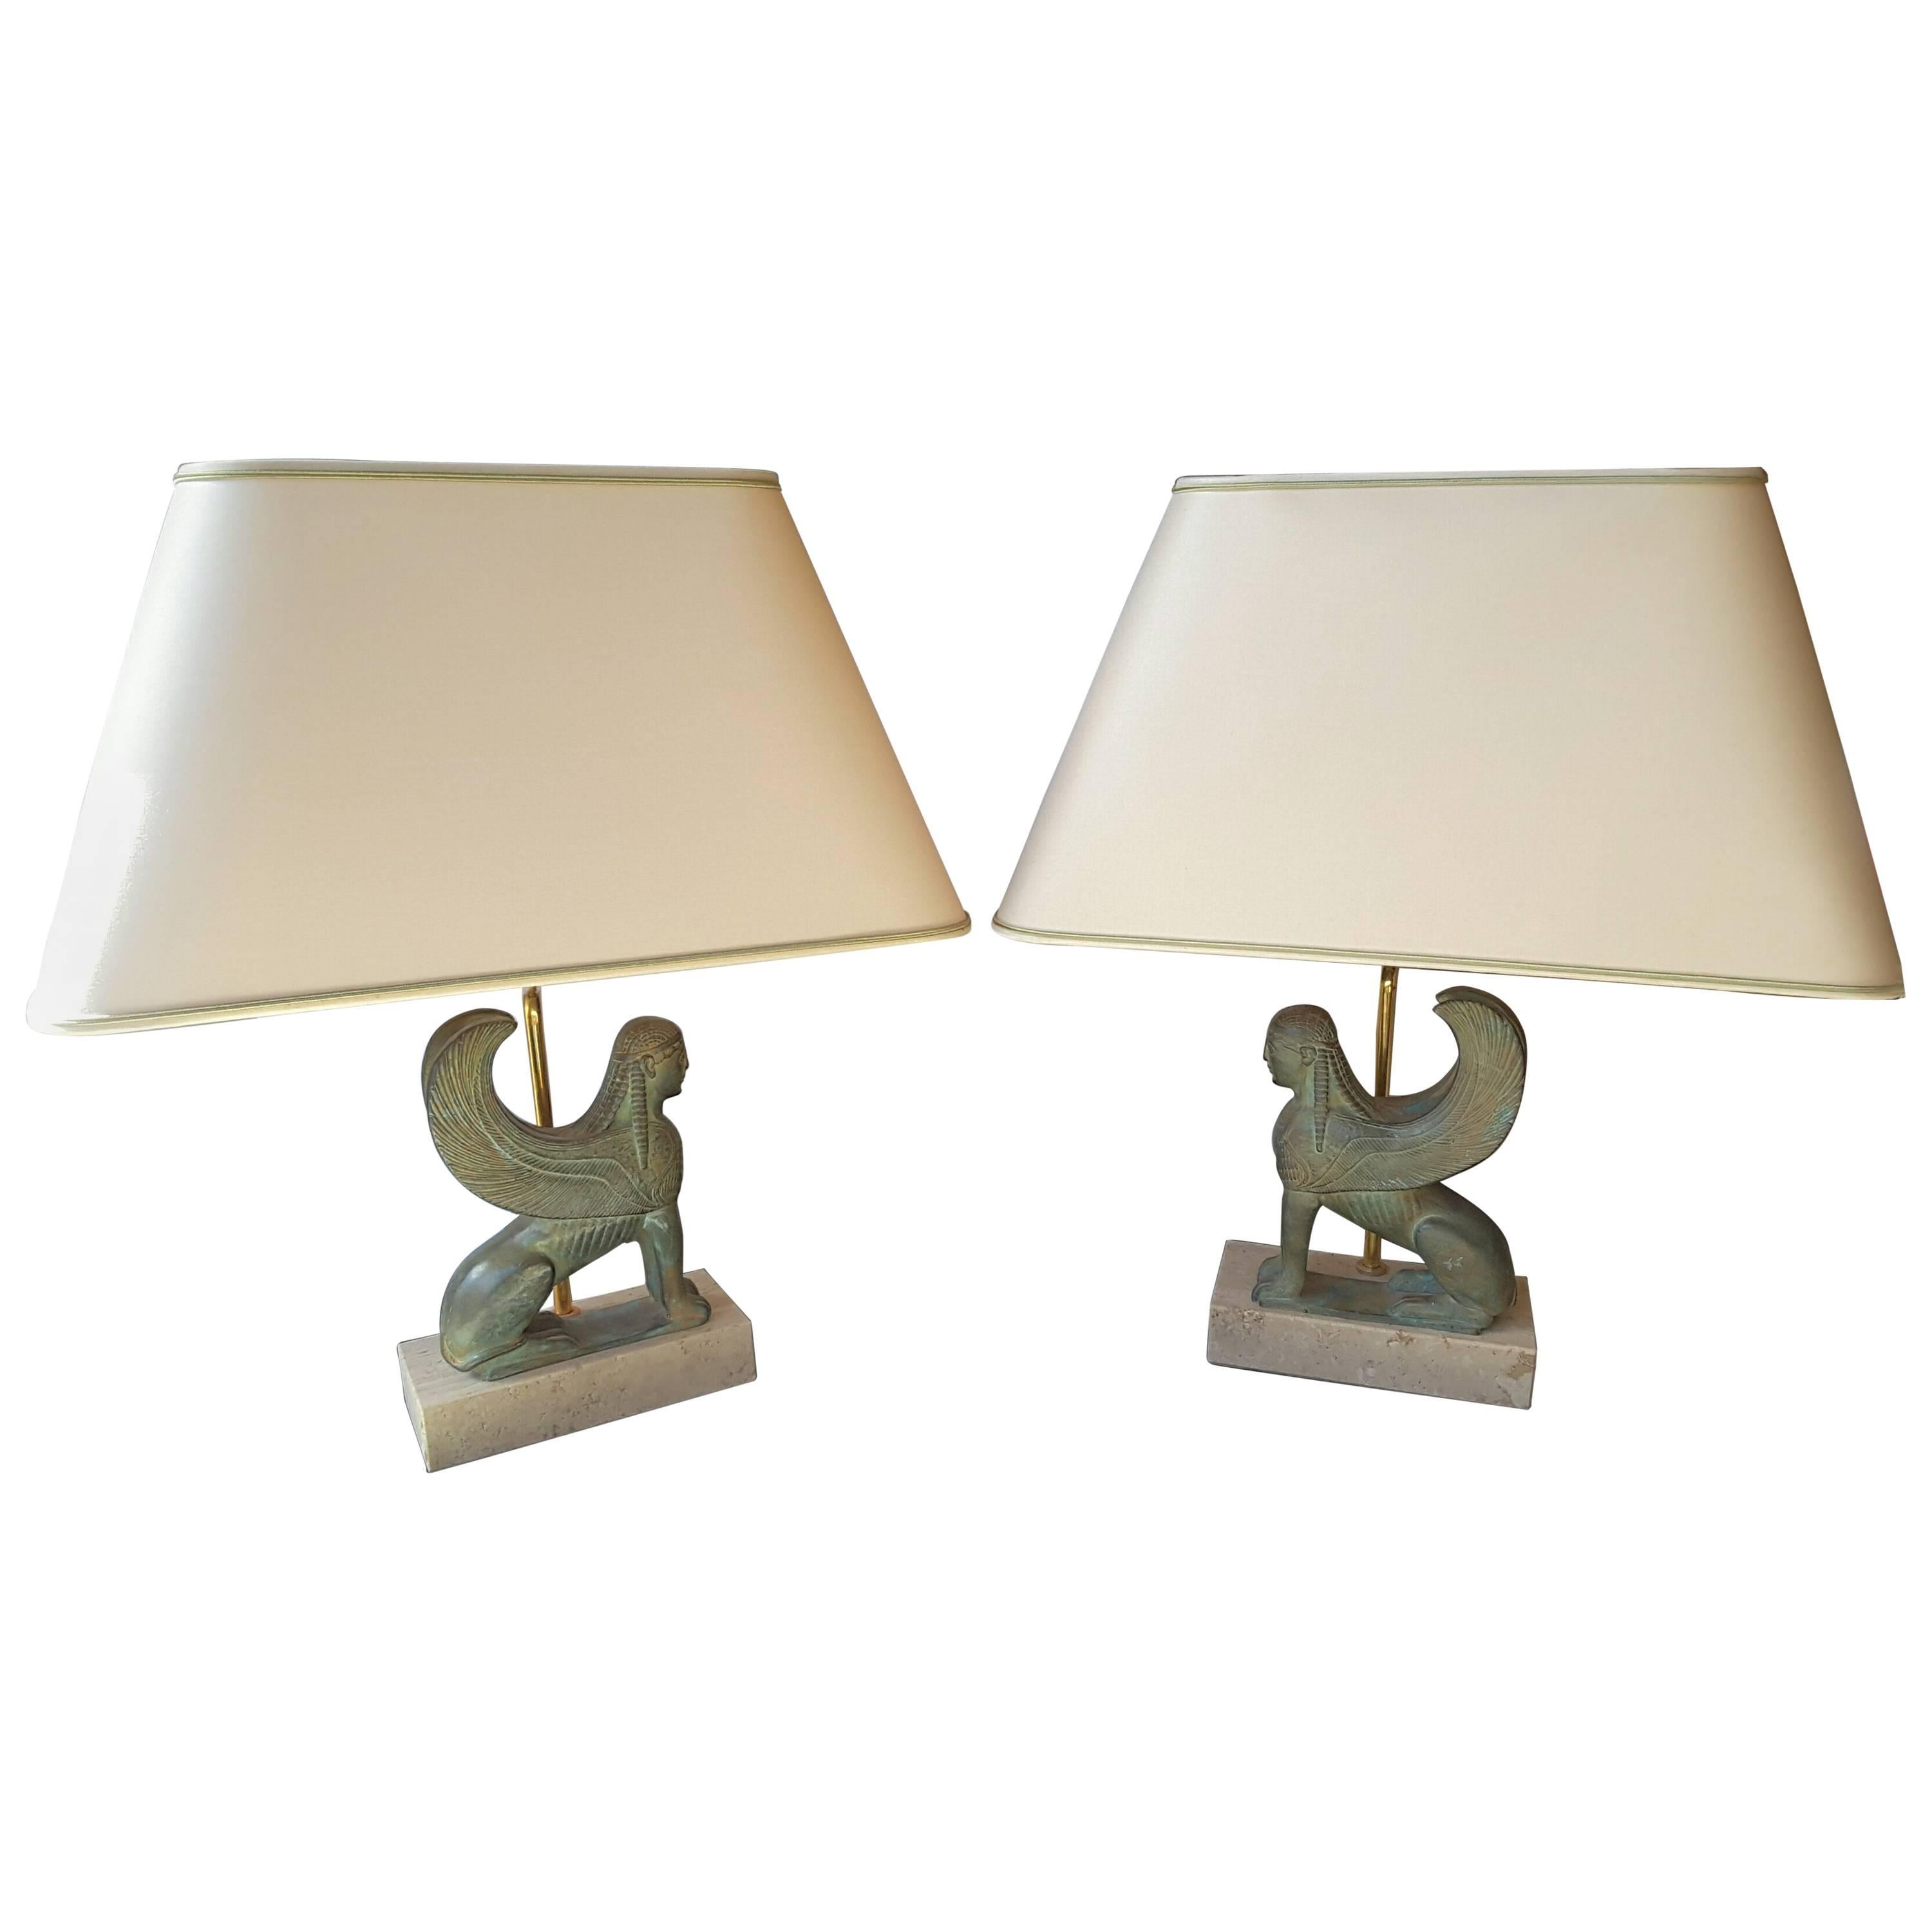 Maison Le Dauphin France, Vintage Pair of Exceptional Sphinx Table Lamps For Sale